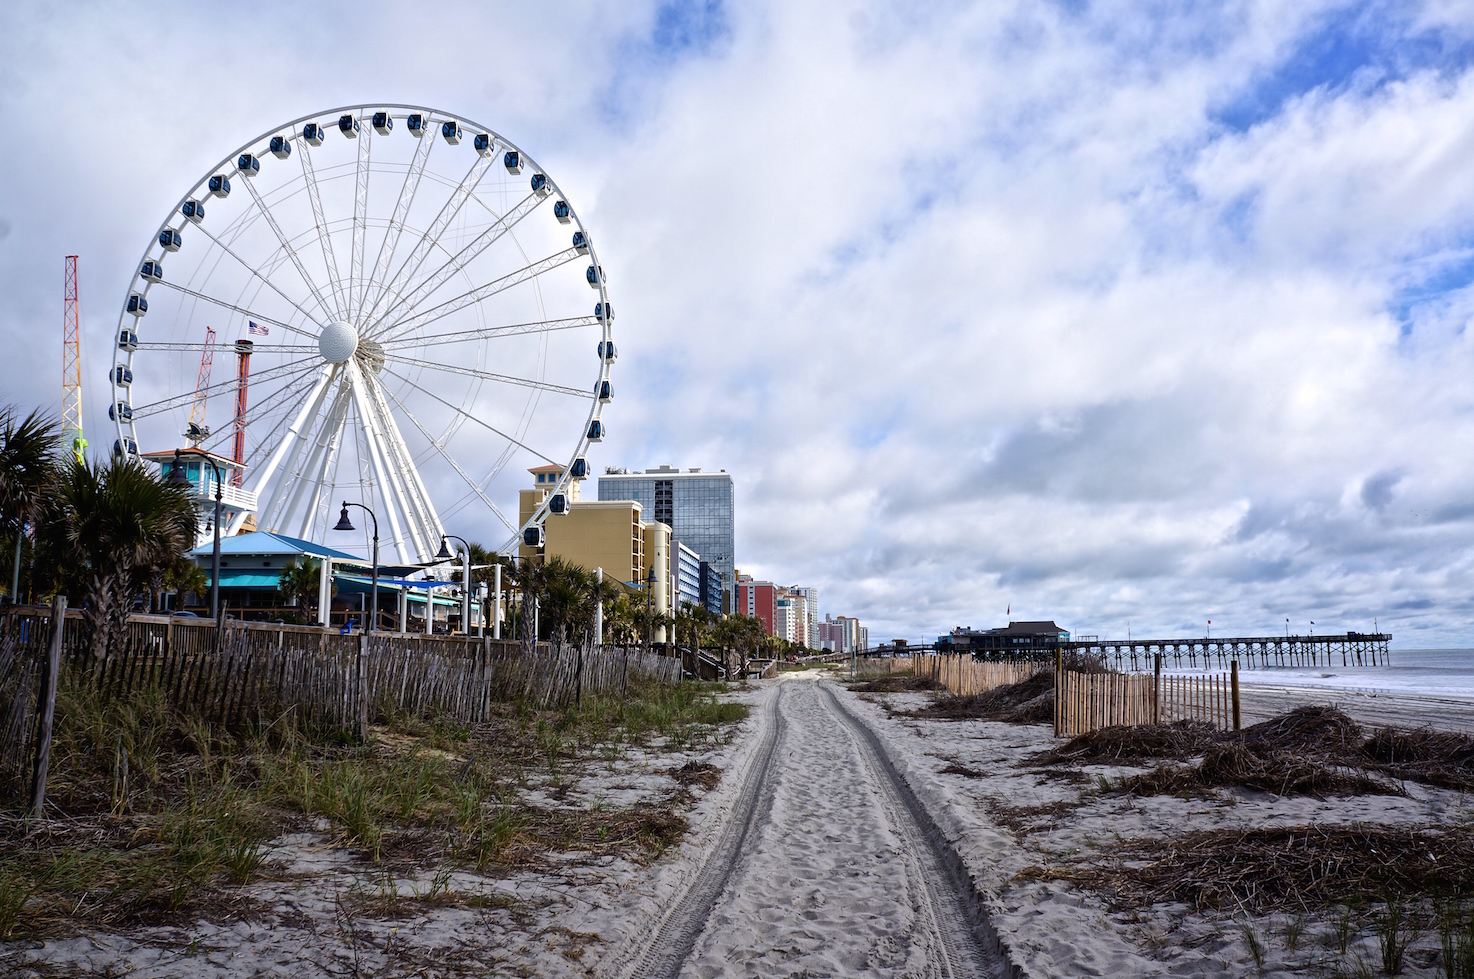 Things to do at Myrtle Beach, South Carolina